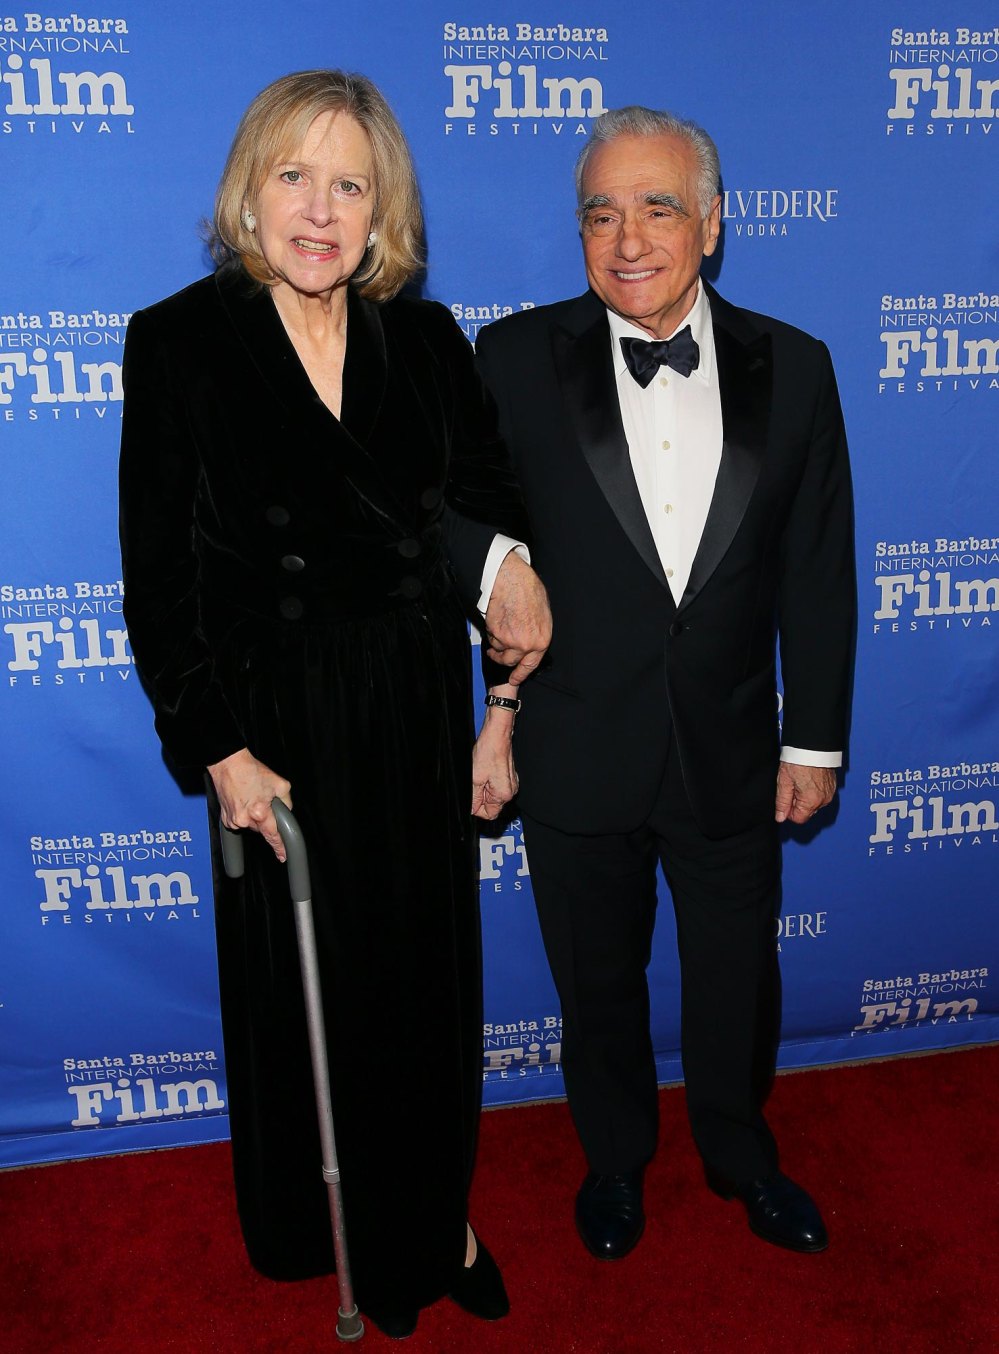 Martin Scorsese Admires Wife Helen s Strength Amid Her 30 Year Journey with Parkinson s Disease 022